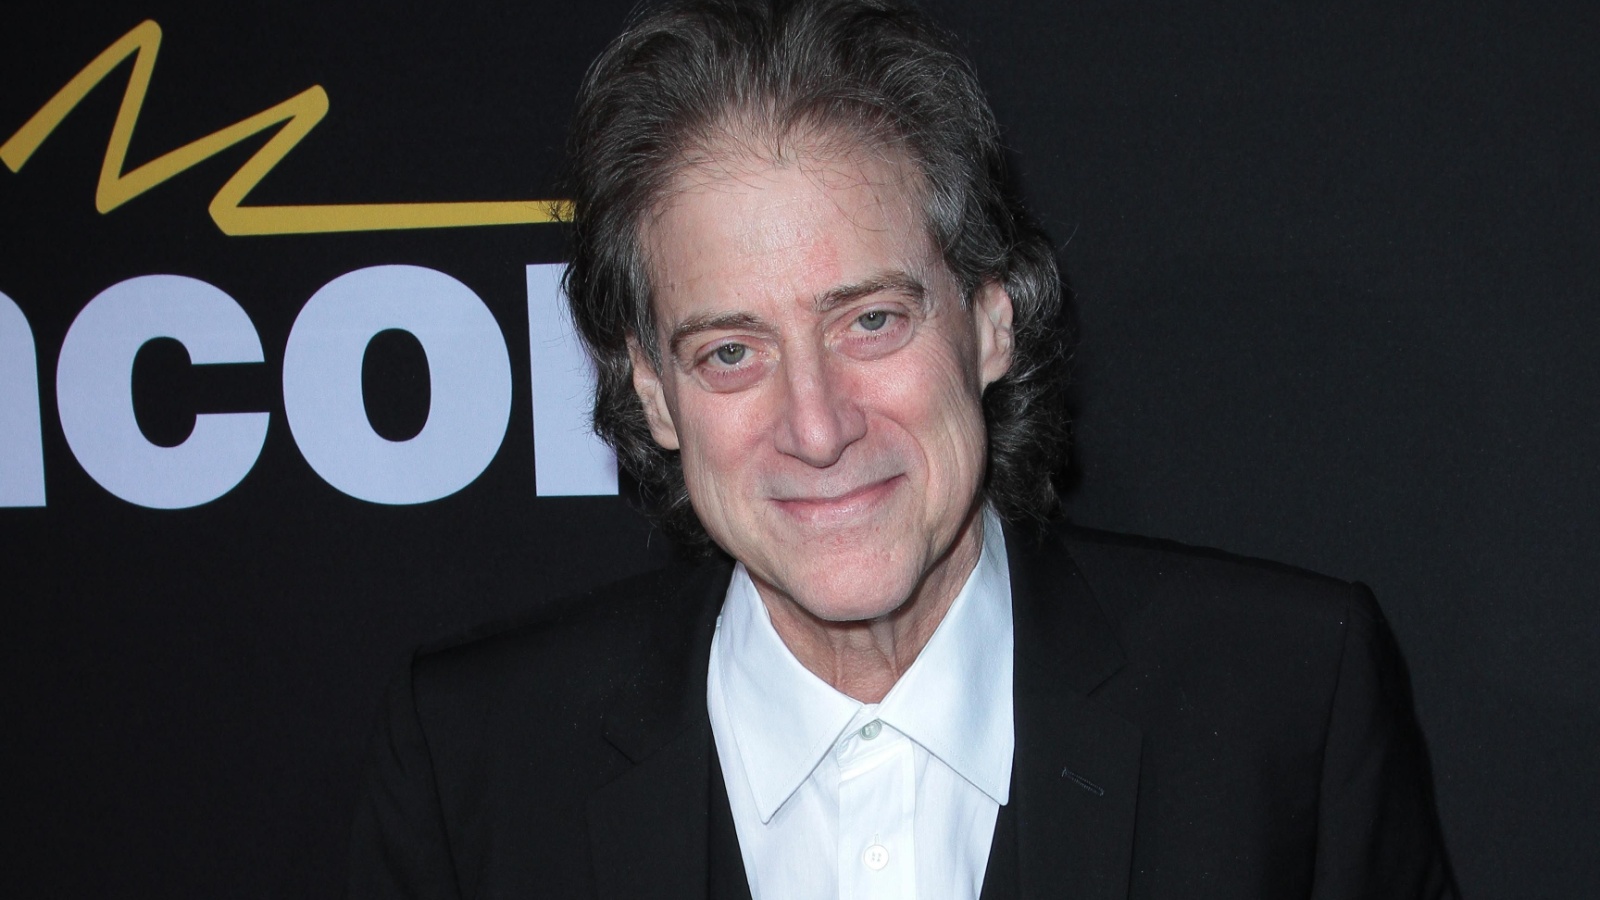 <p><span>The immensely talented comedian Richard Lewis passed away on February 28, 2024. Richard died suddenly at home from a heart attack at the age of 76. Those who were close to Richard say that he passed peacefully.</span></p><p><span>Richard Lewis had a wildly successful career in the entertainment world. He worked alongside greats like Larry David on the hit show <em>Curb Your Enthusiasm</em>. It was recently disclosed that Richard Lewis had Parkinson’s disease.</span></p><p><a class="theme markdown__link" href="https://www.msn.com/en-us/channel/source/Movie%20Nights/sr-vid-d3yx0j8wg3fdqxaqdfi2763g5nci5pve998s6wqpatsfh409wnvs" rel="noopener noreferrer">Follow us on MSN to see more of our exclusive entertainment content.</a></p>